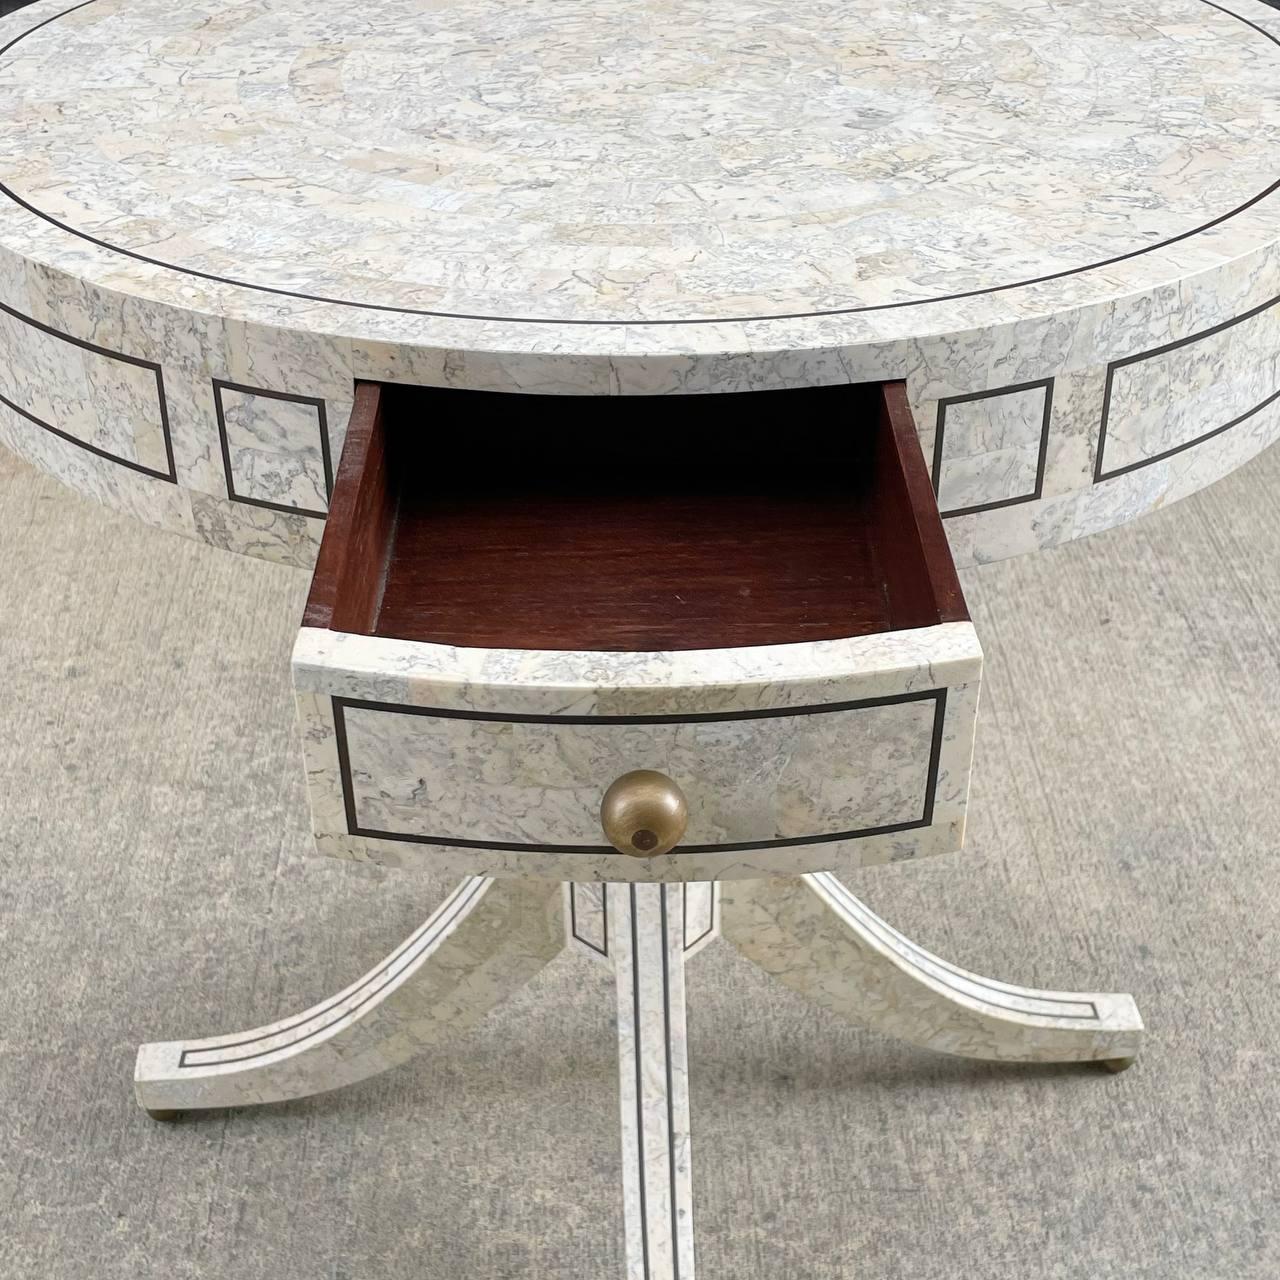 Mid-20th Century Vintage Tessellated Pedestal Drum Table by Maitland Smith For Sale